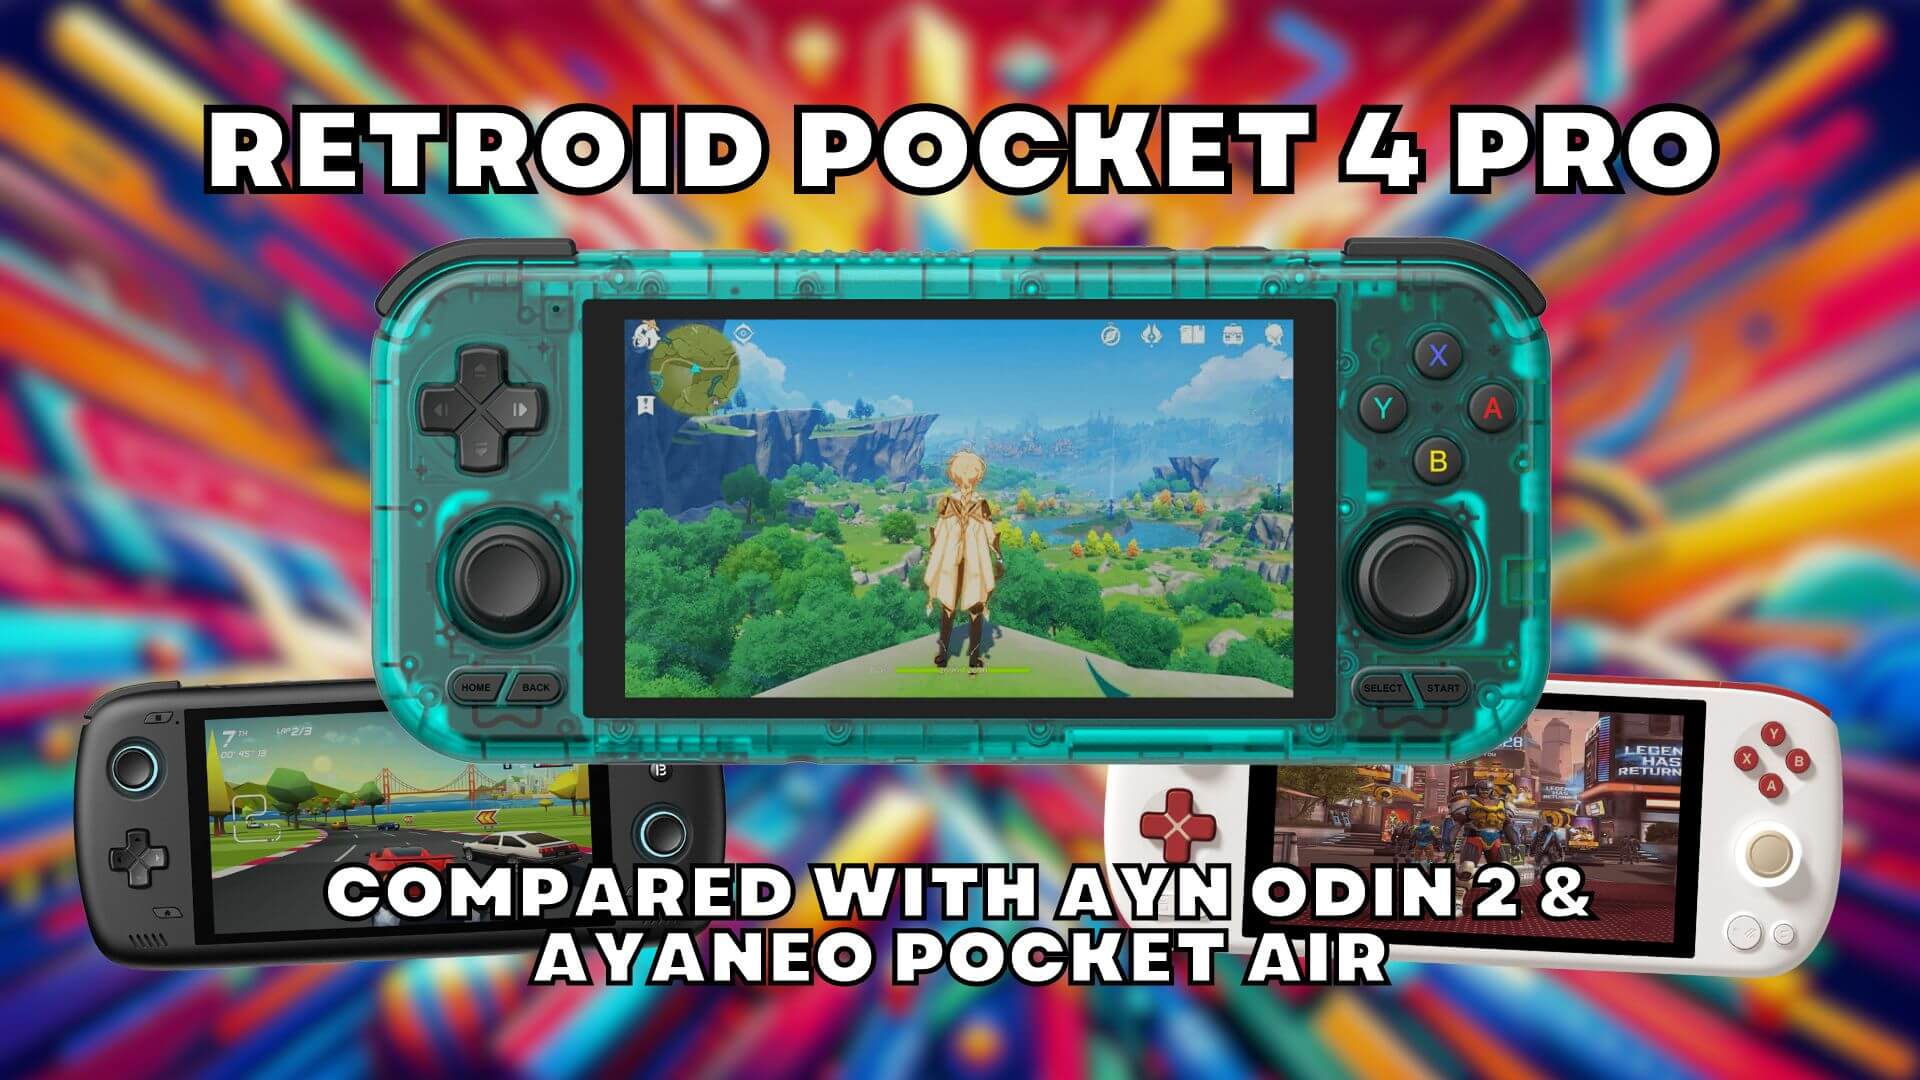 Retroid Pocket 4 PRO Review – Excellent price vs performance Android handheld